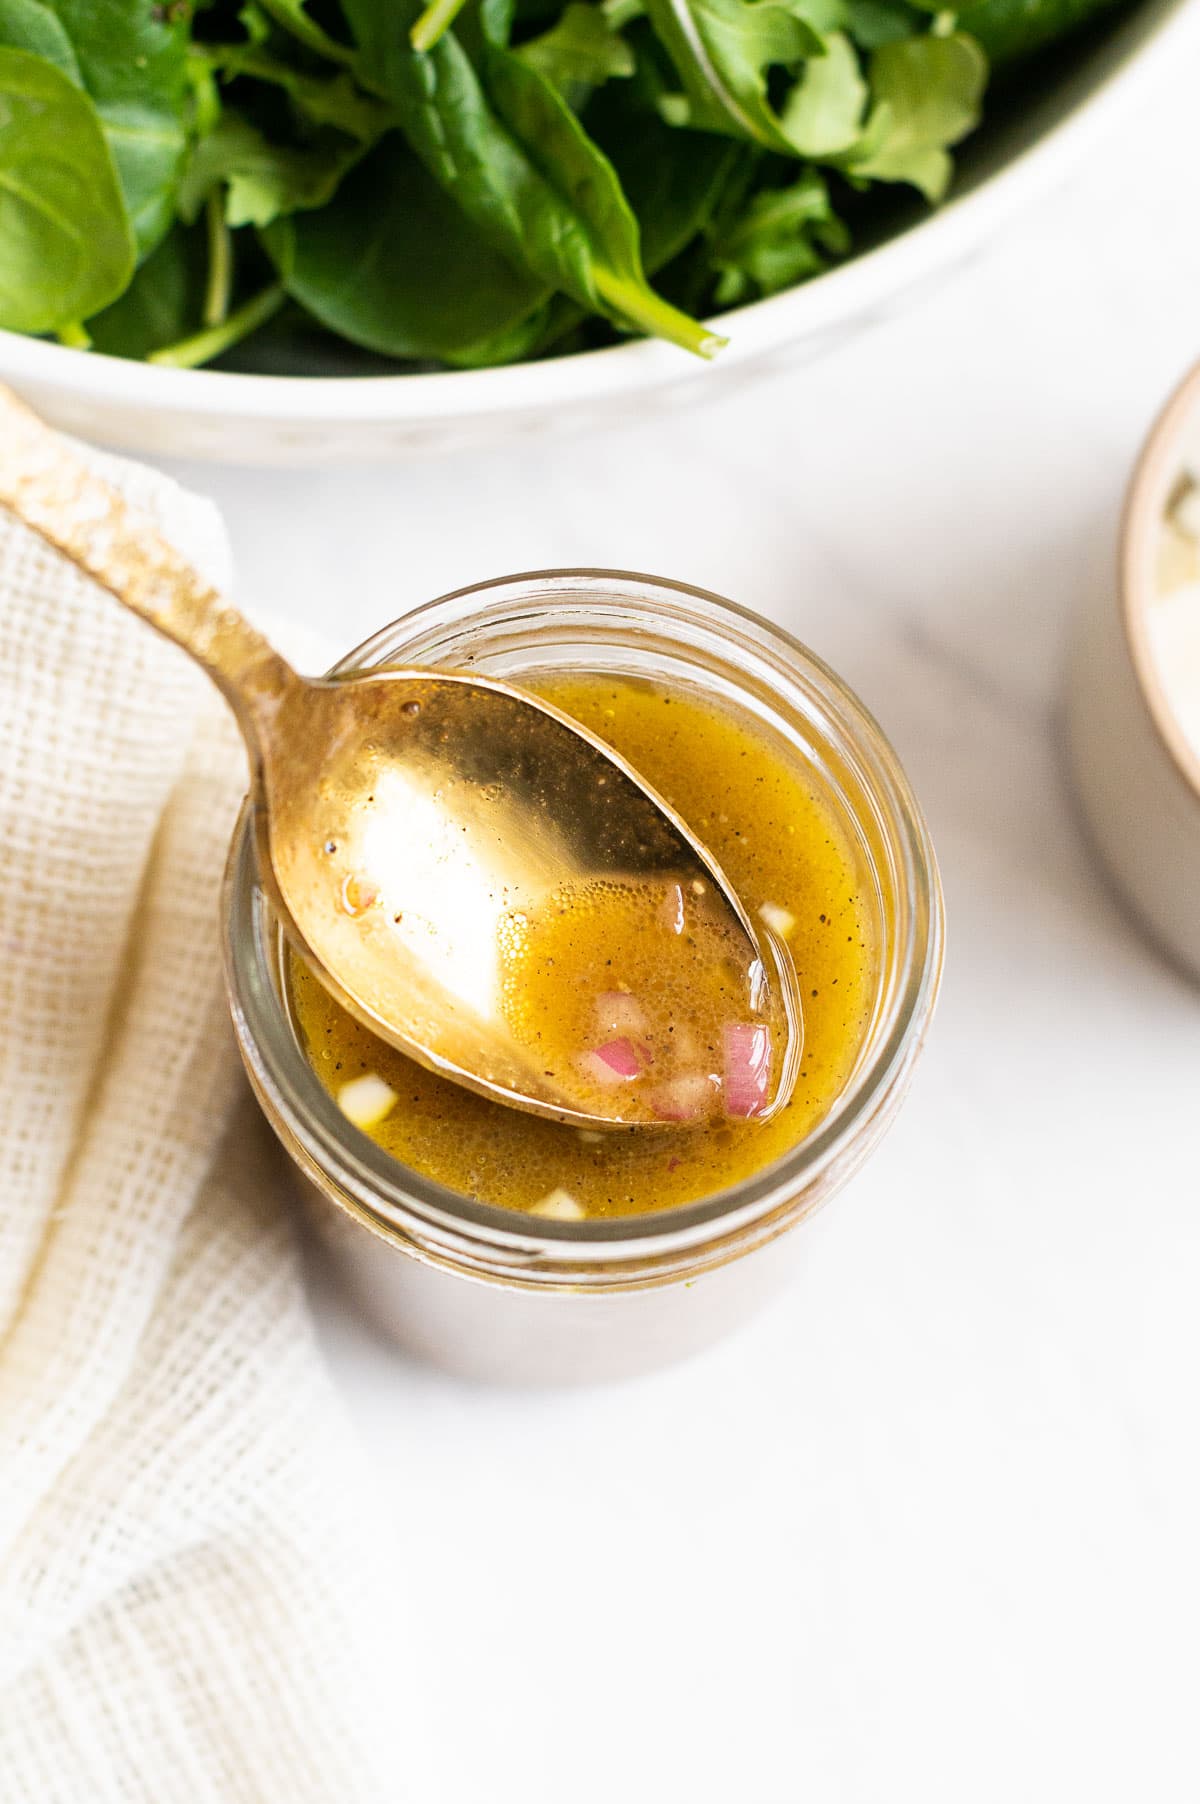 Close up of spinach salad dressing with red onion on a spoon.